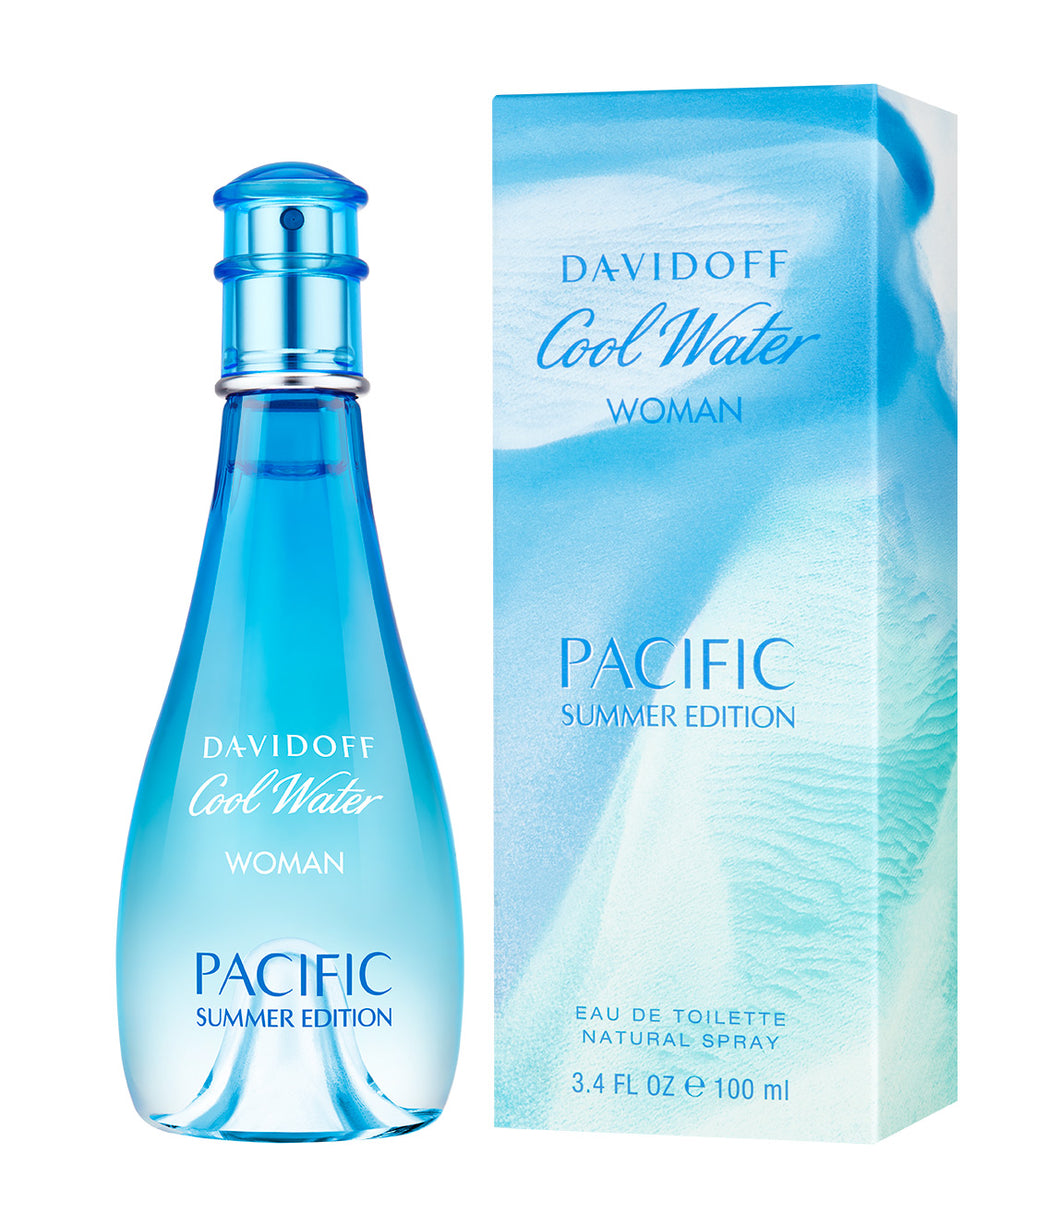 Cool Water Pacific Summer Edition by Davidoff for Women